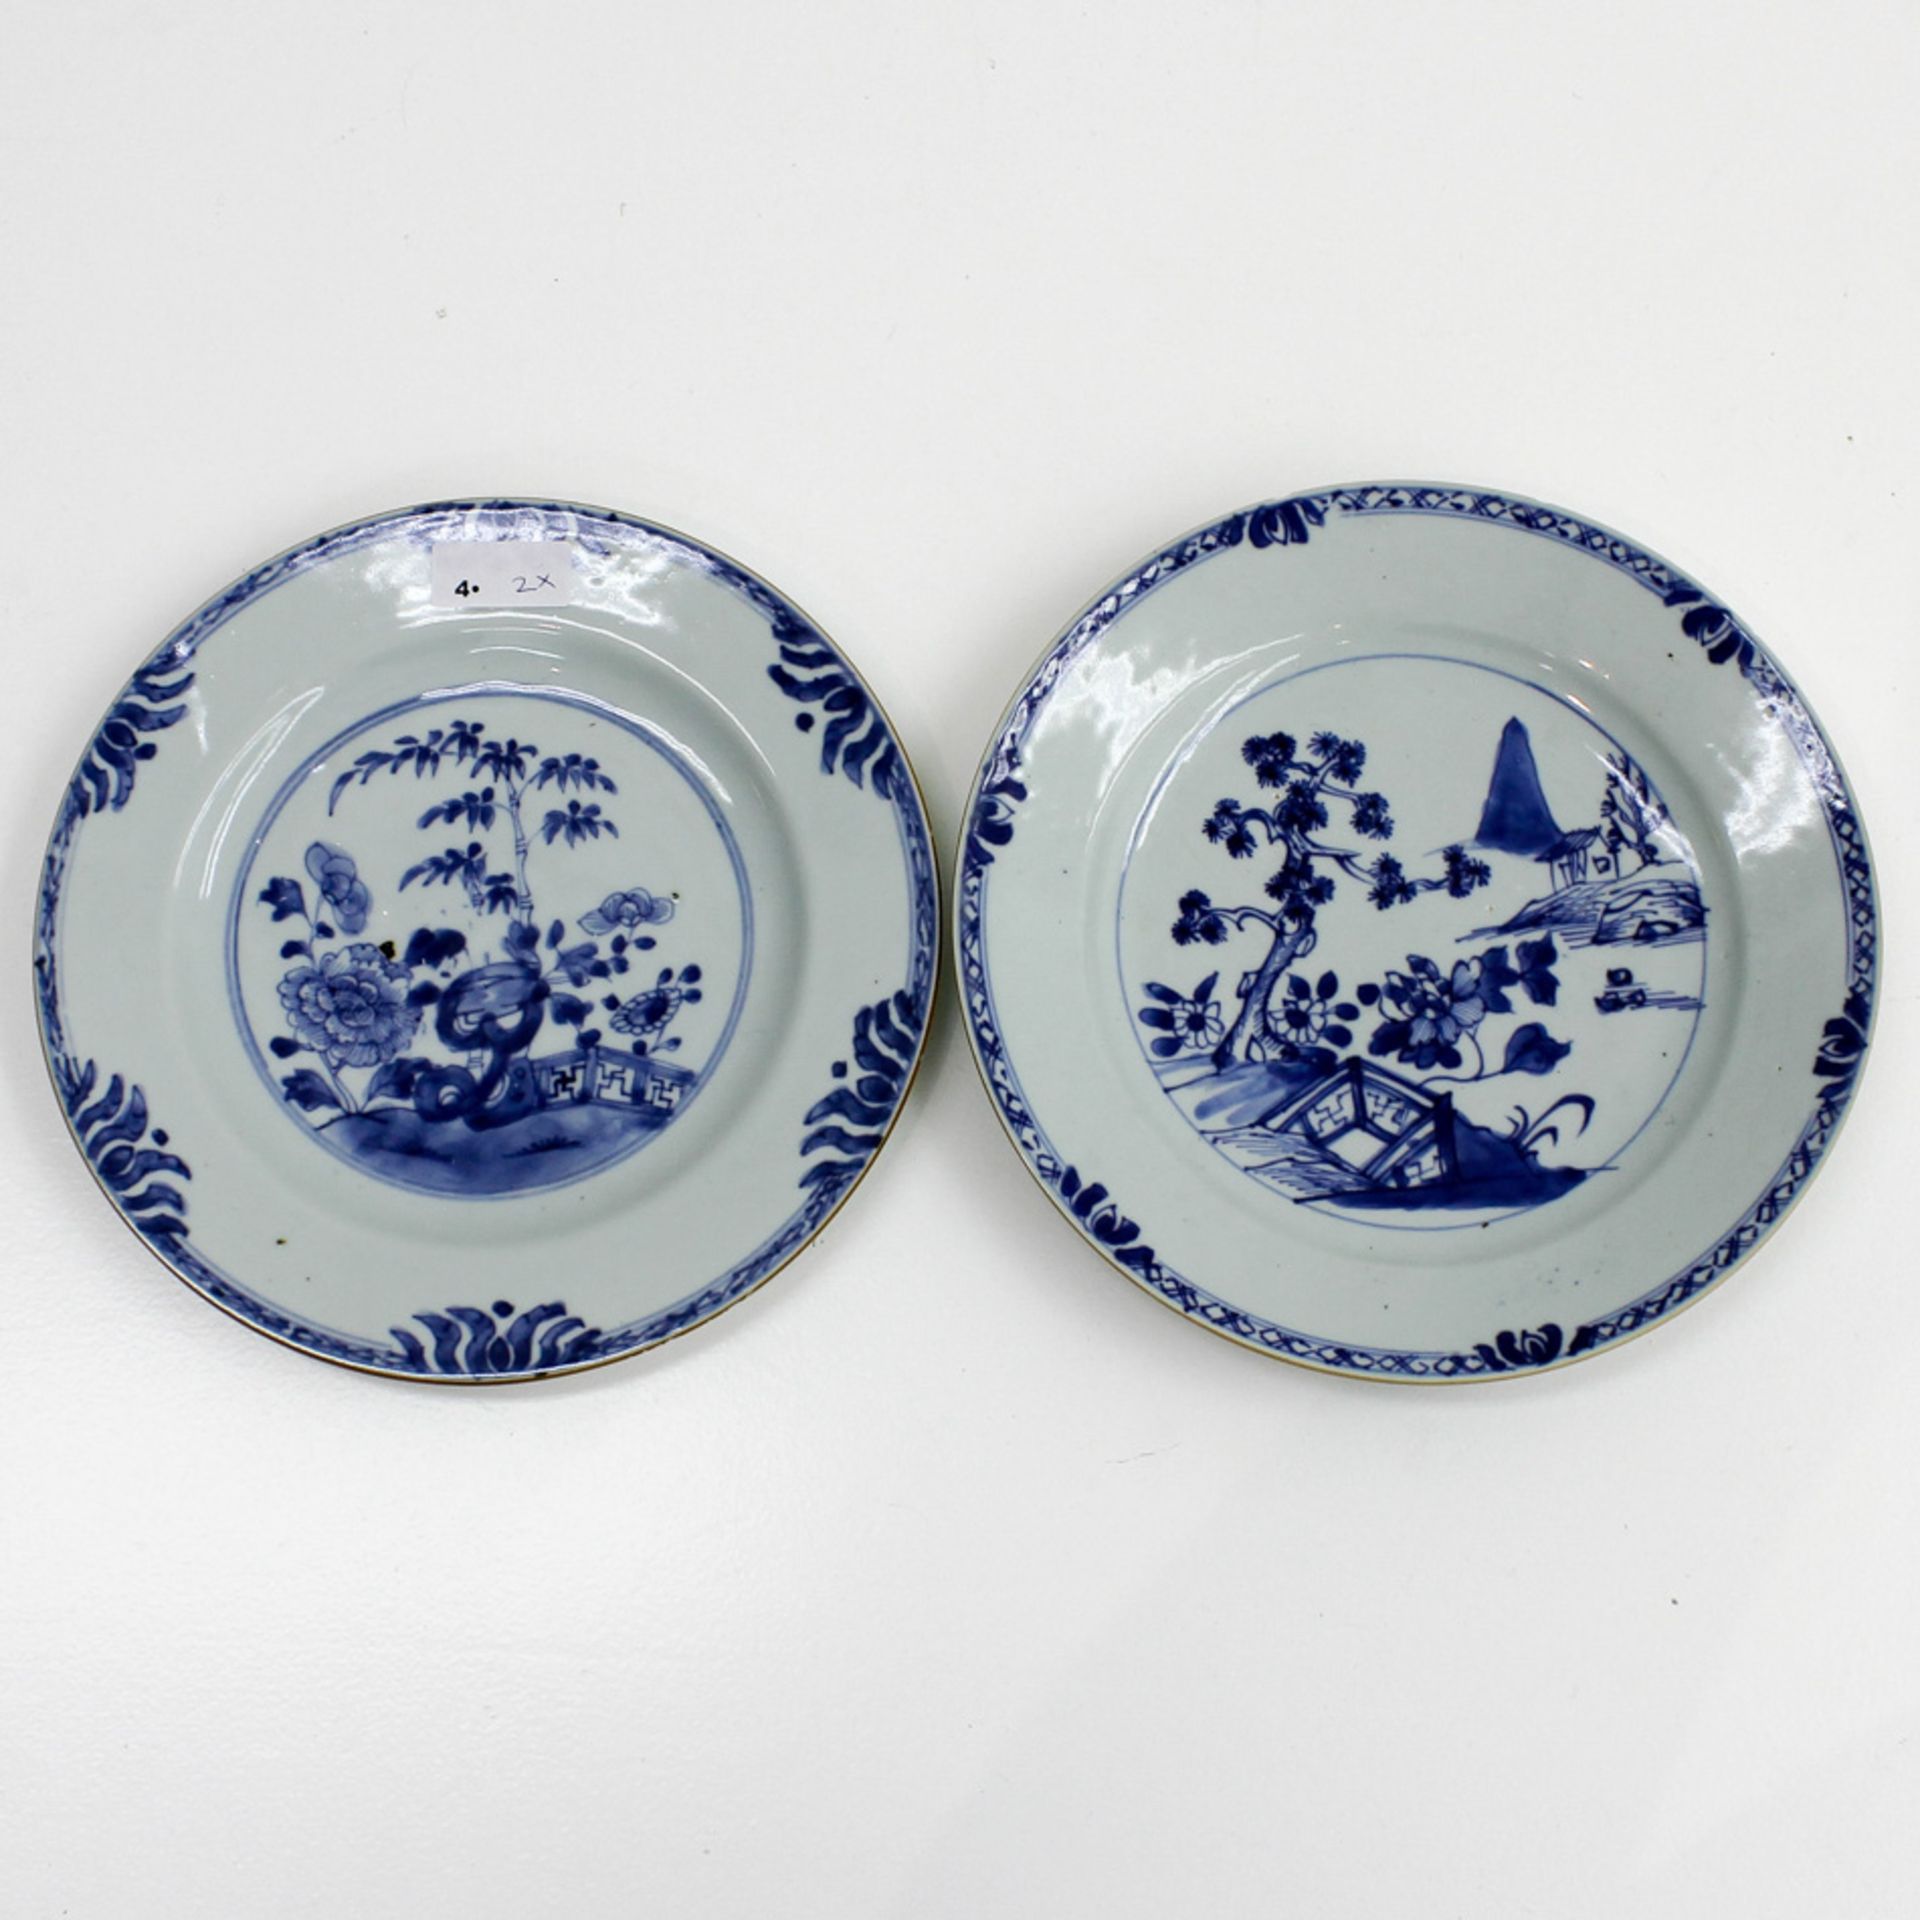 Lot of 2 18th Century China Porcelain Plates Blue and white Floral Decor, 1 with small hairline,